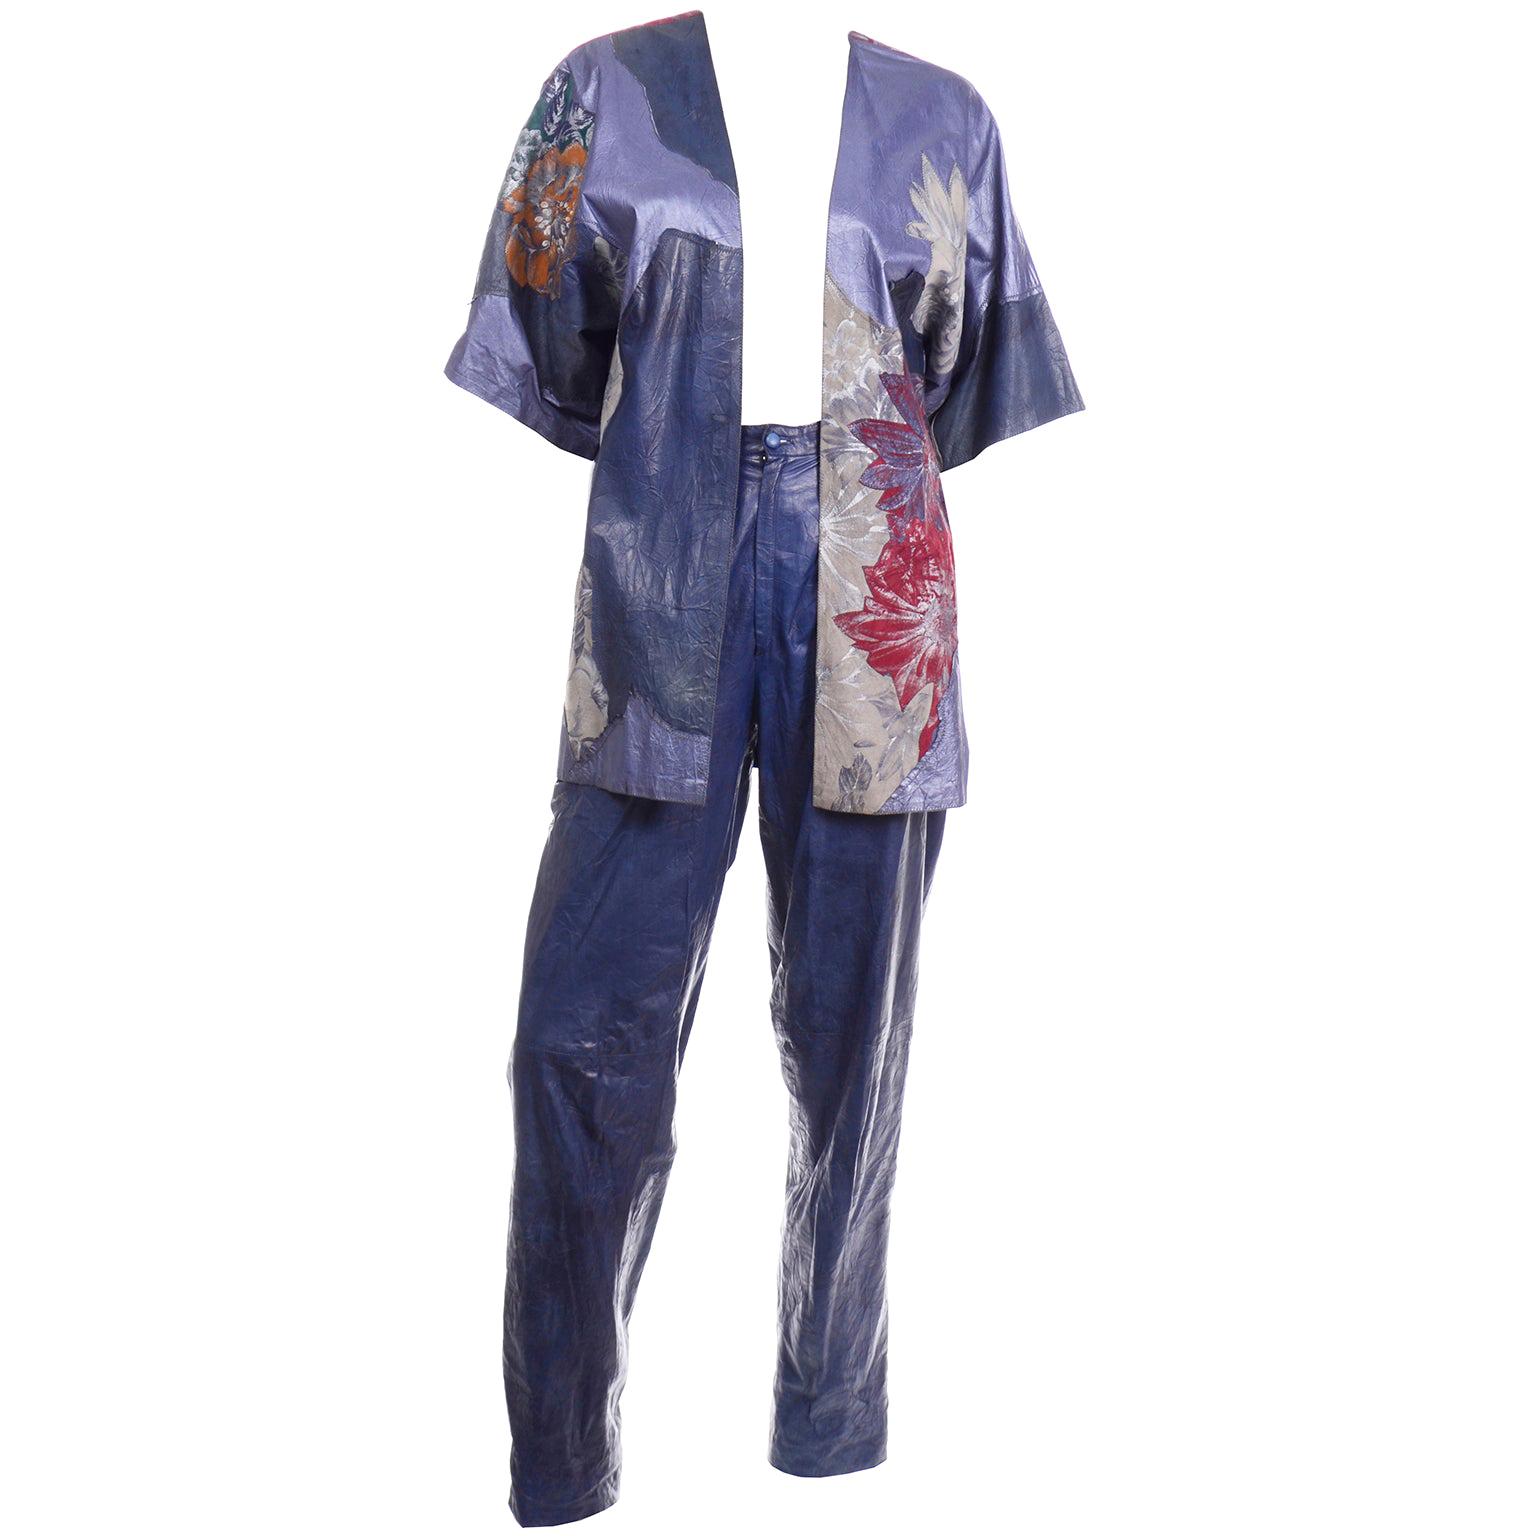 Roberto Cavalli Patchwork Blue Leather Pants & Hand Painted Jacket Suit Outfit